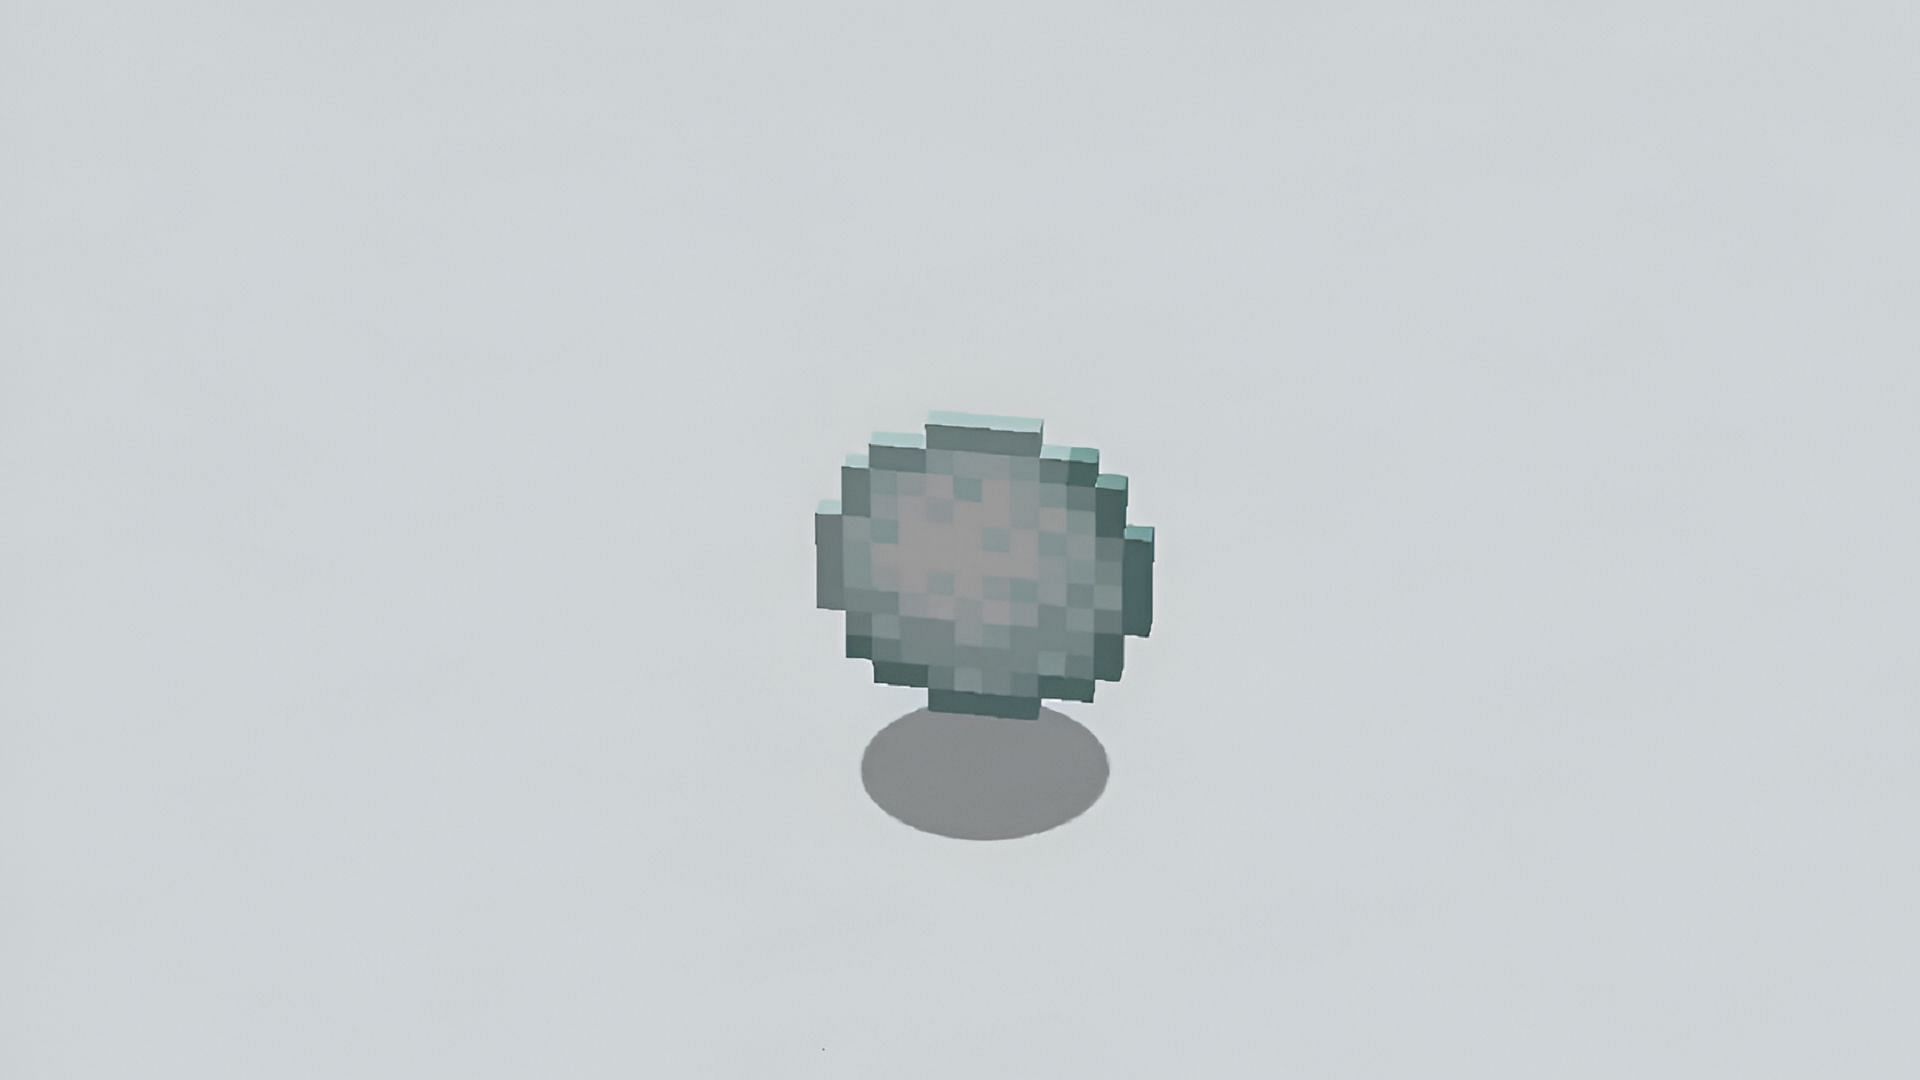 Snowballs may not be the best projectile in Minecraft, but they have applications (Image via Mojang)